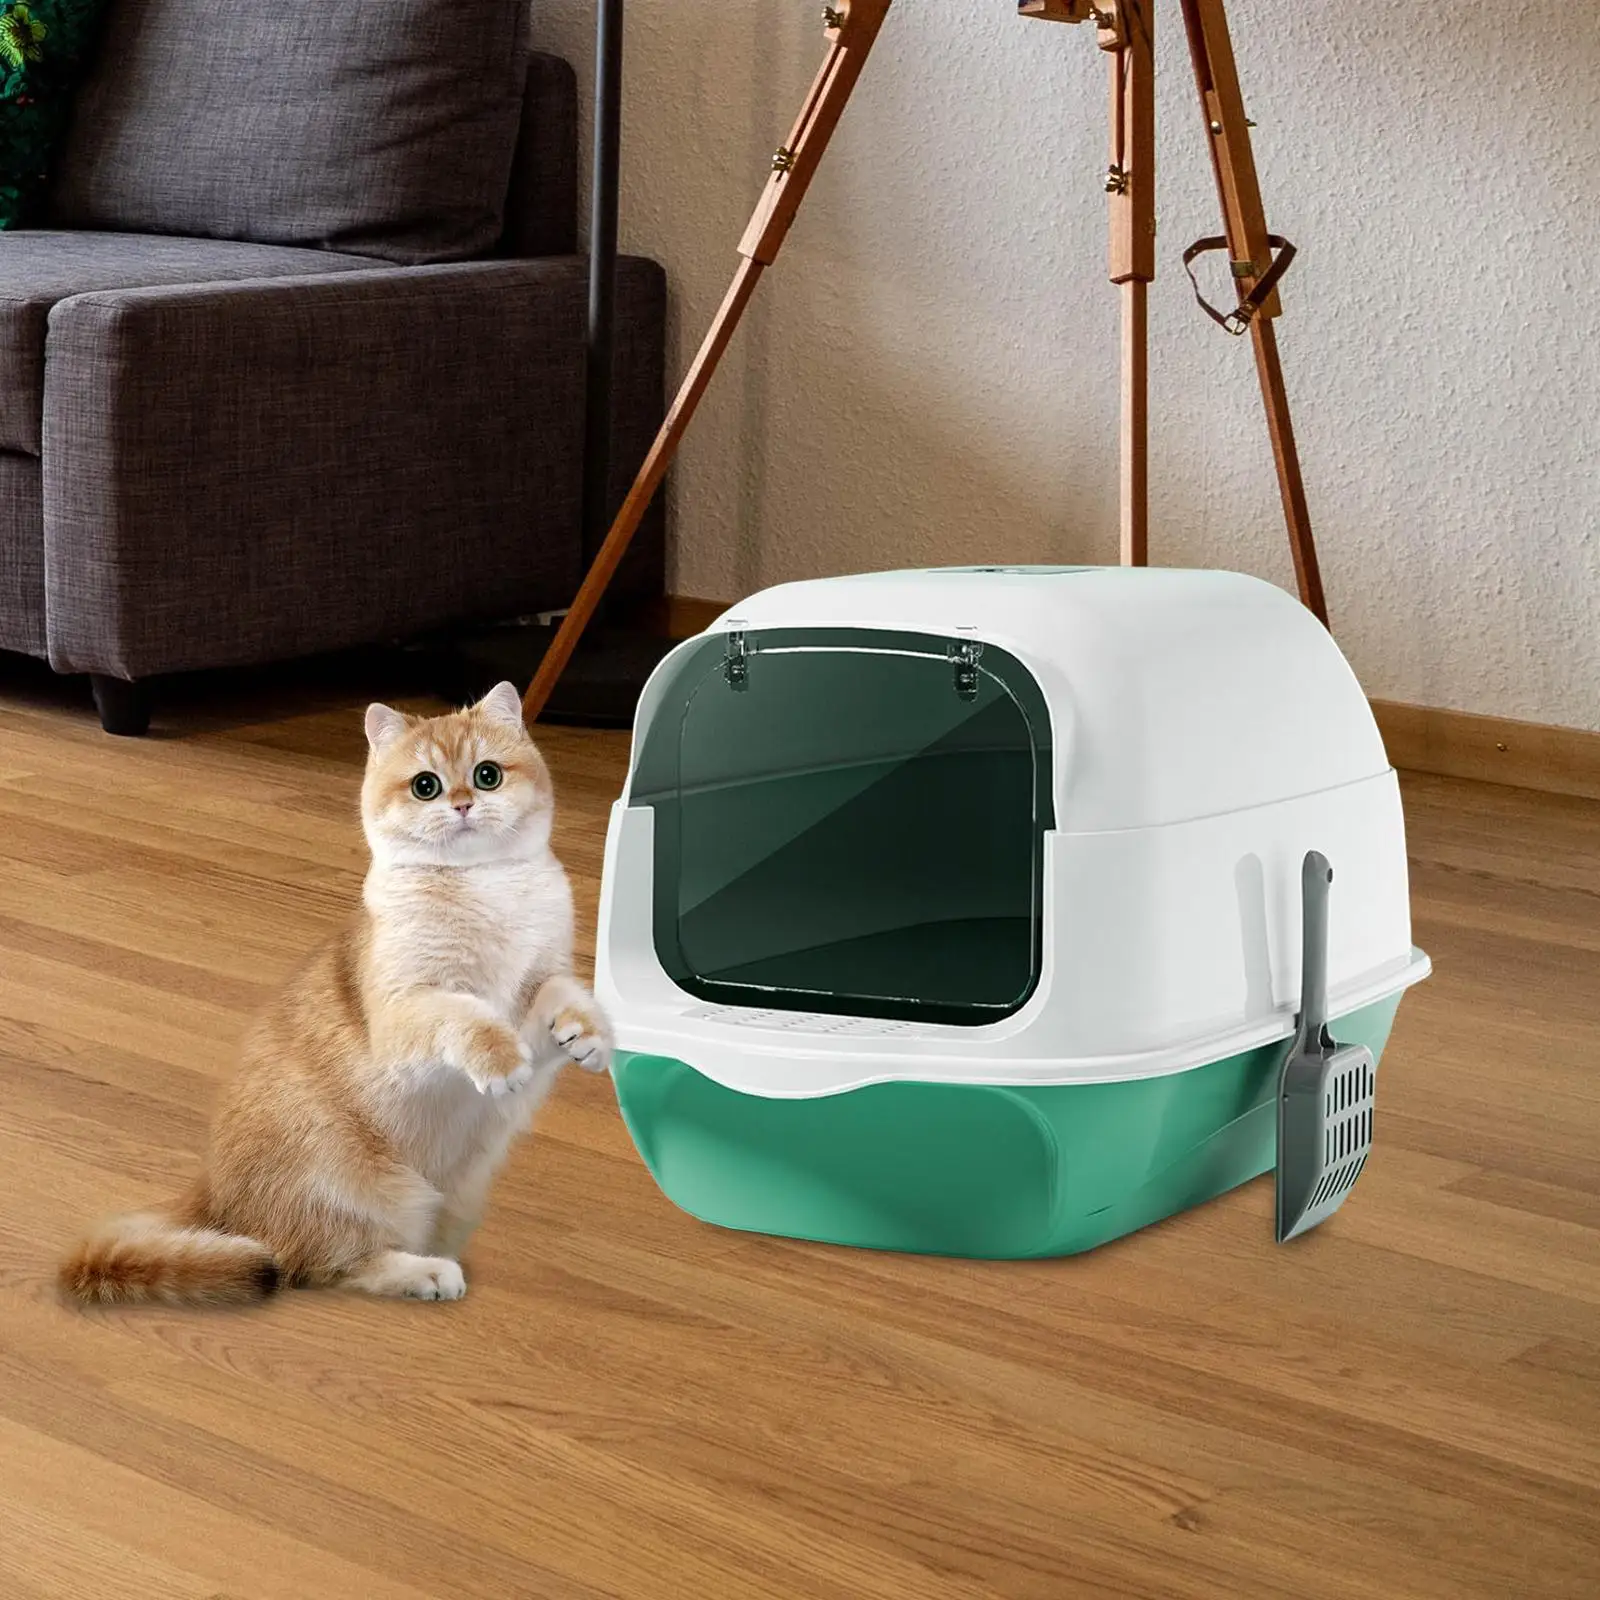 Hooded Cat Litter Box Fully Enclosed Cat Toilet Large Pet Accessories with Cat Litter Shovel Durable Removable Kitty Litter Tray